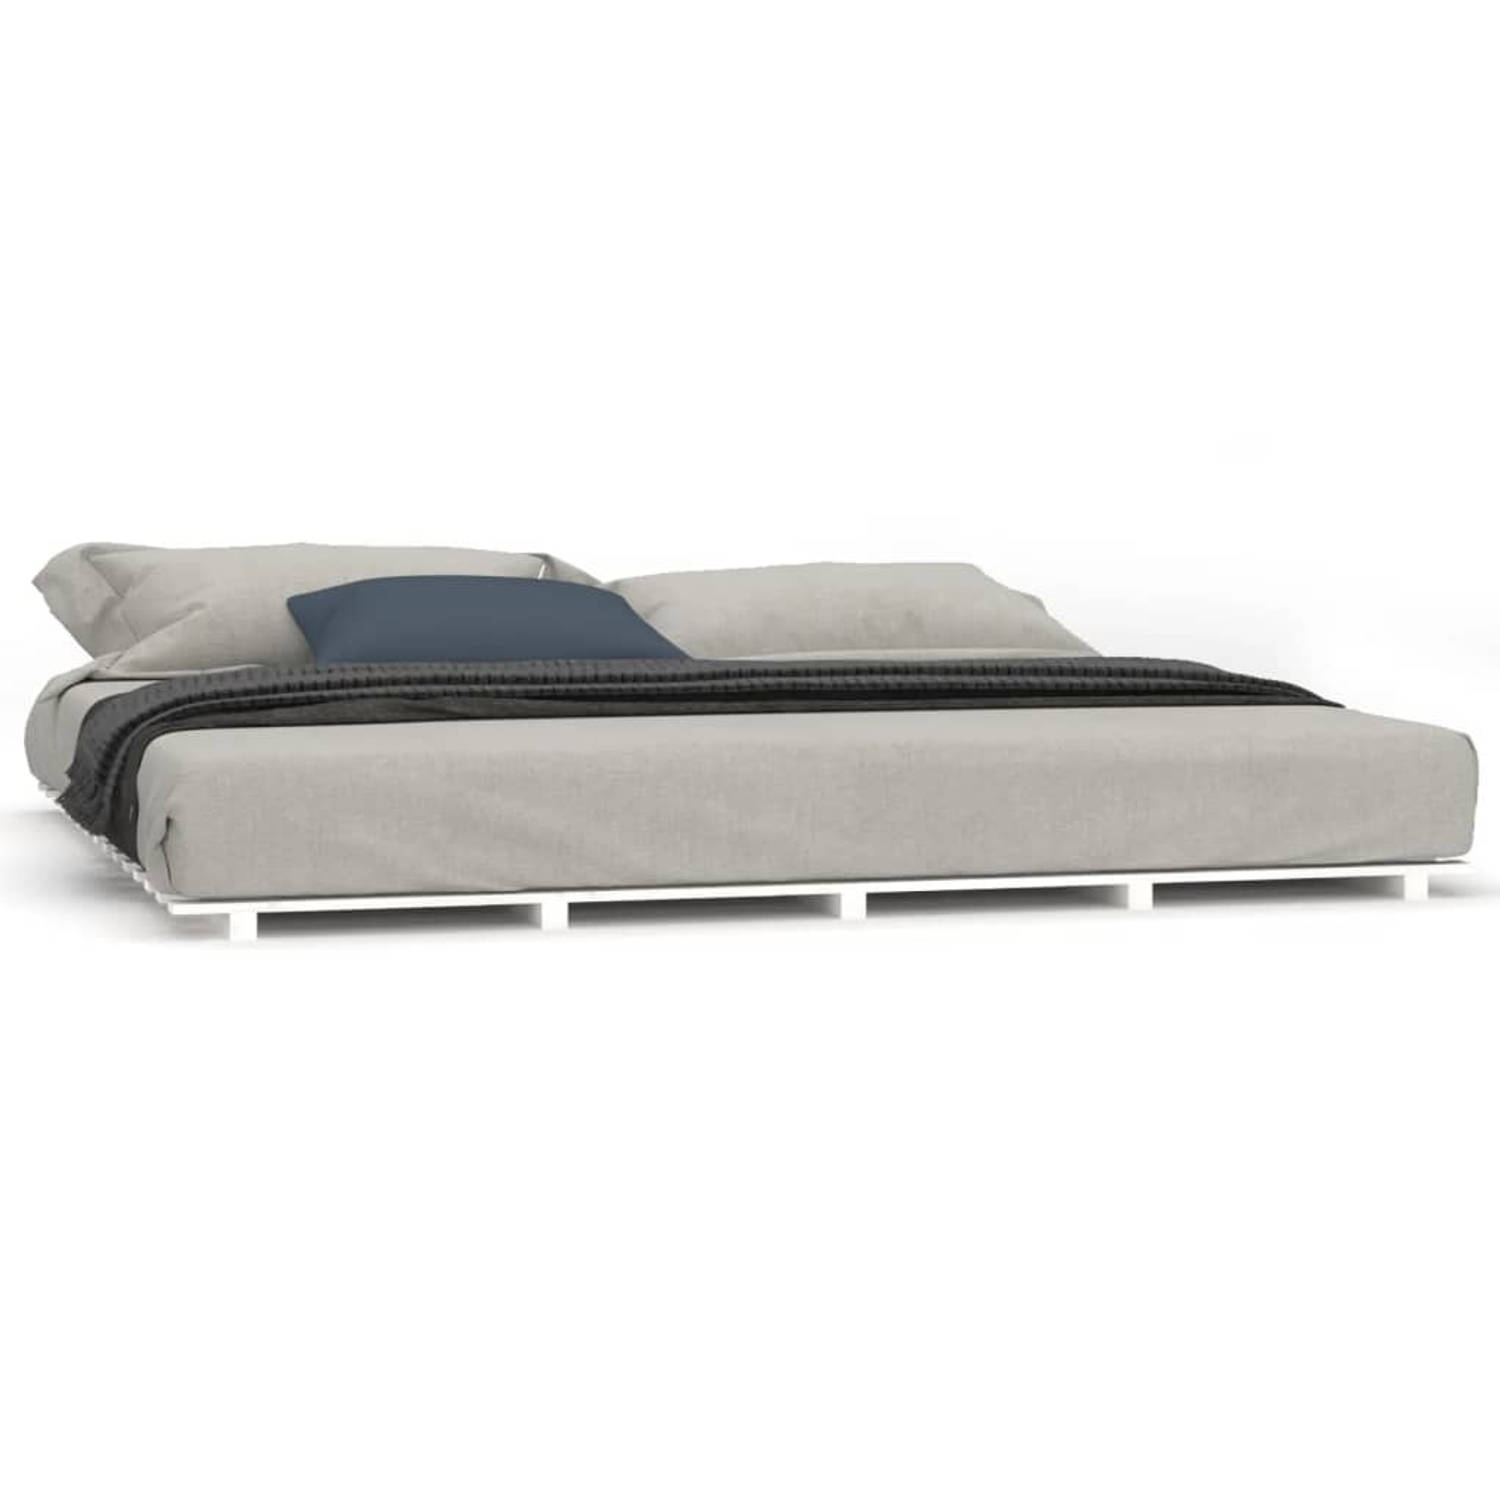 The Living Store Bedframe massief grenenhout wit 200x200 cm - Bed